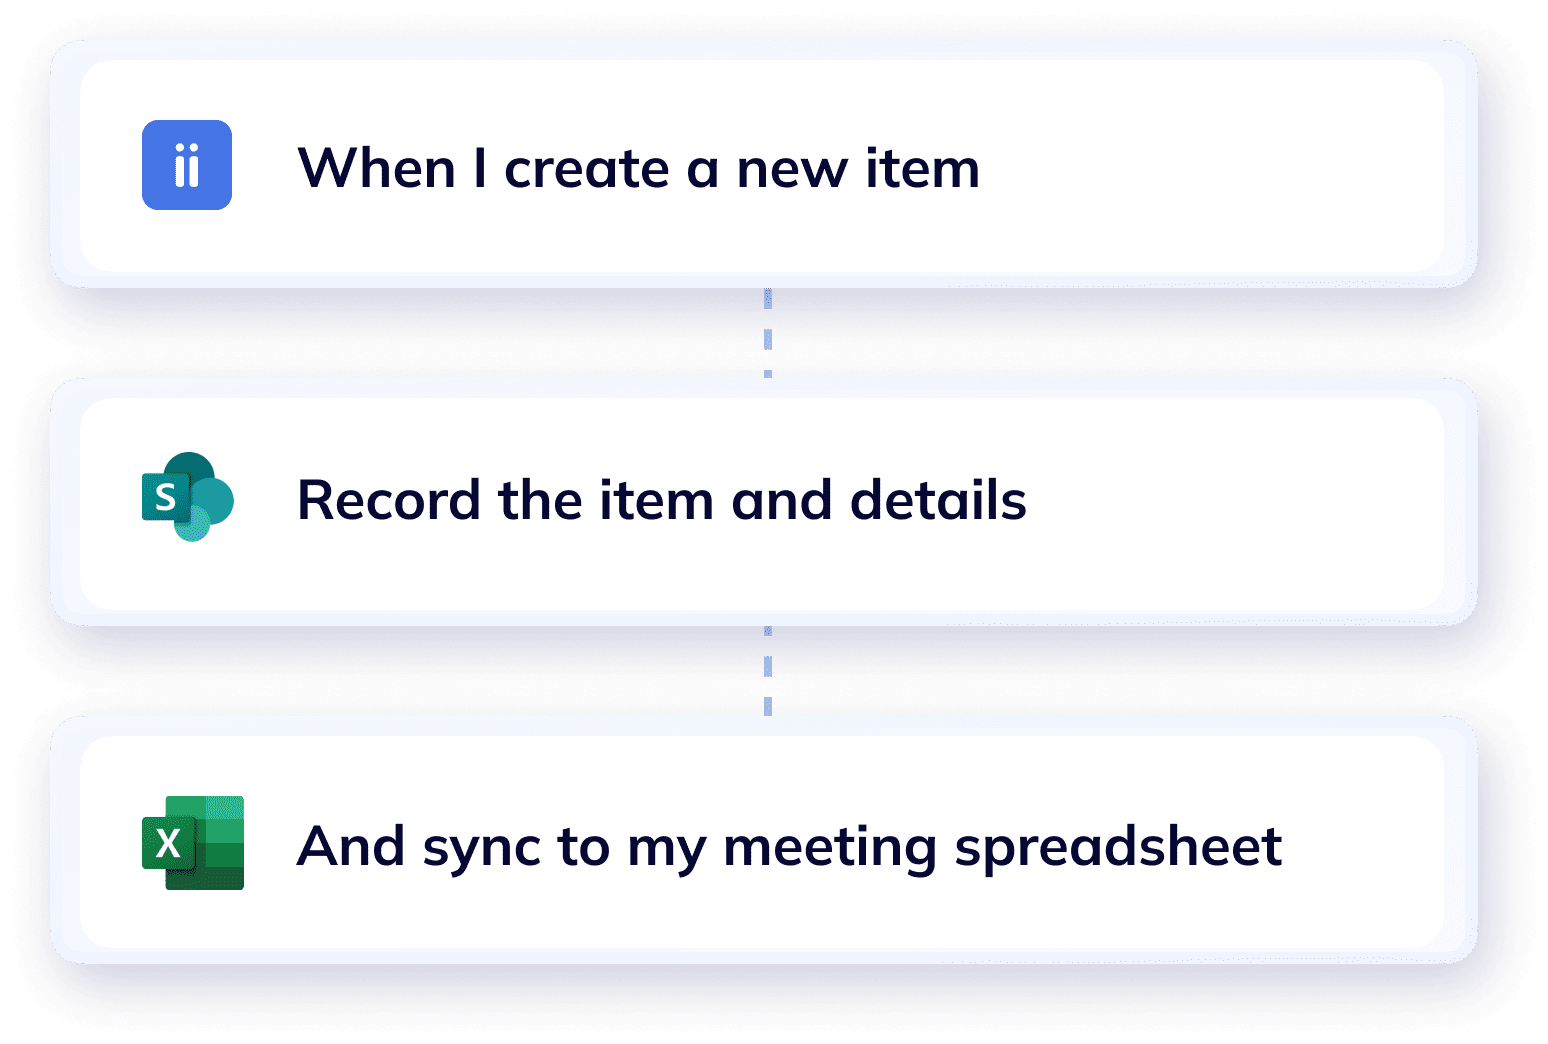 Workflow of syncing data to spreadsheets in Wiise